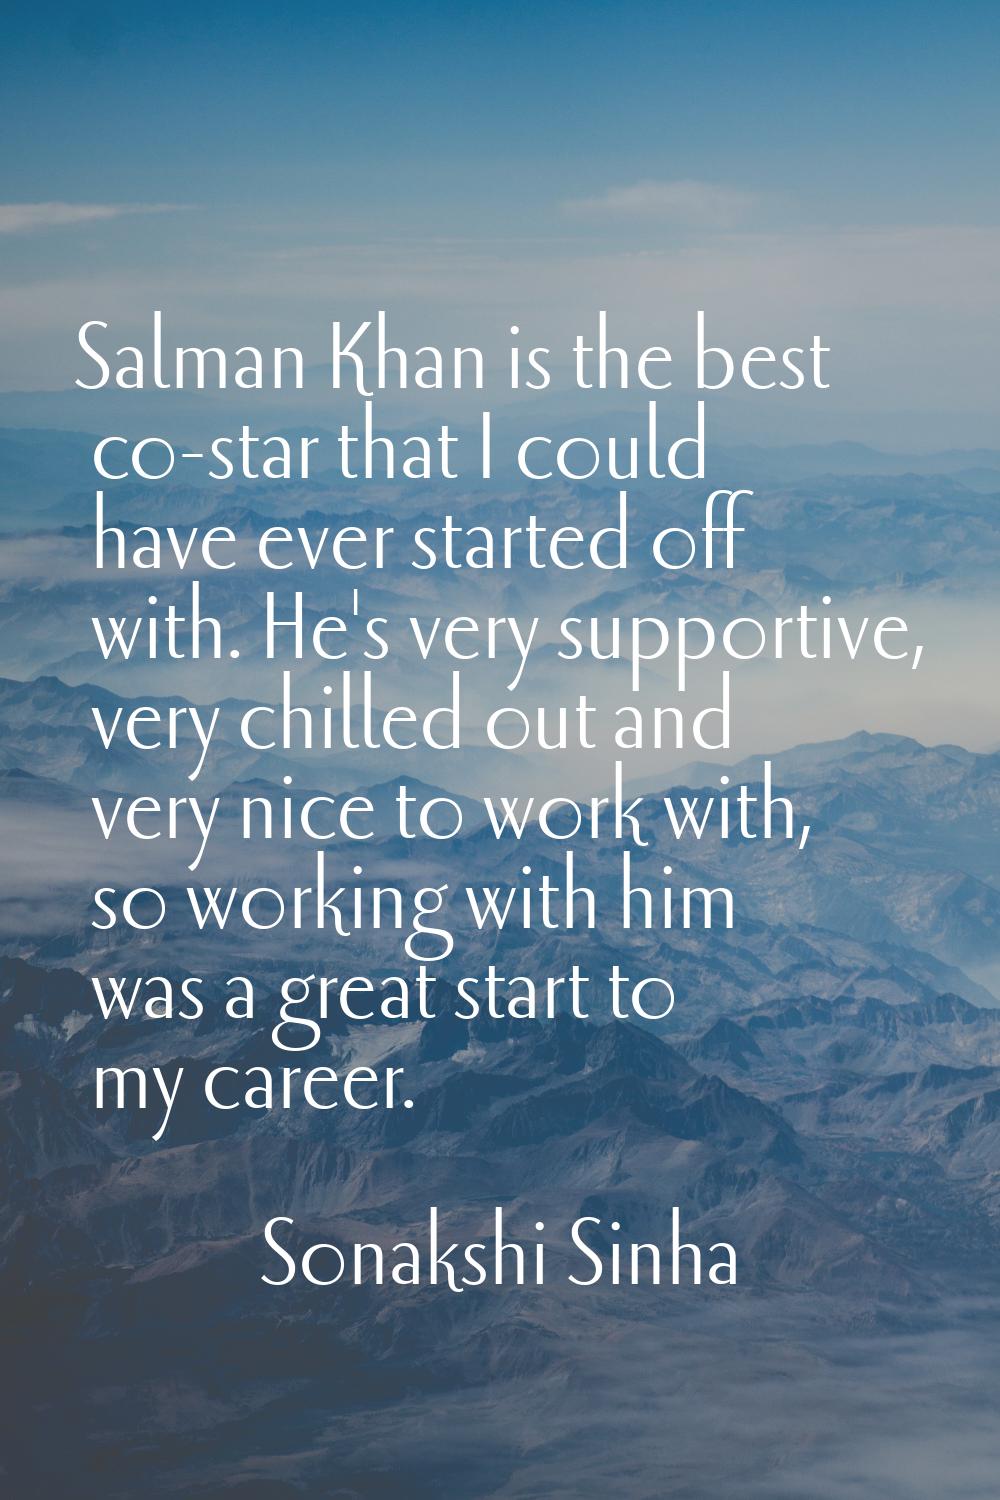 Salman Khan is the best co-star that I could have ever started off with. He's very supportive, very